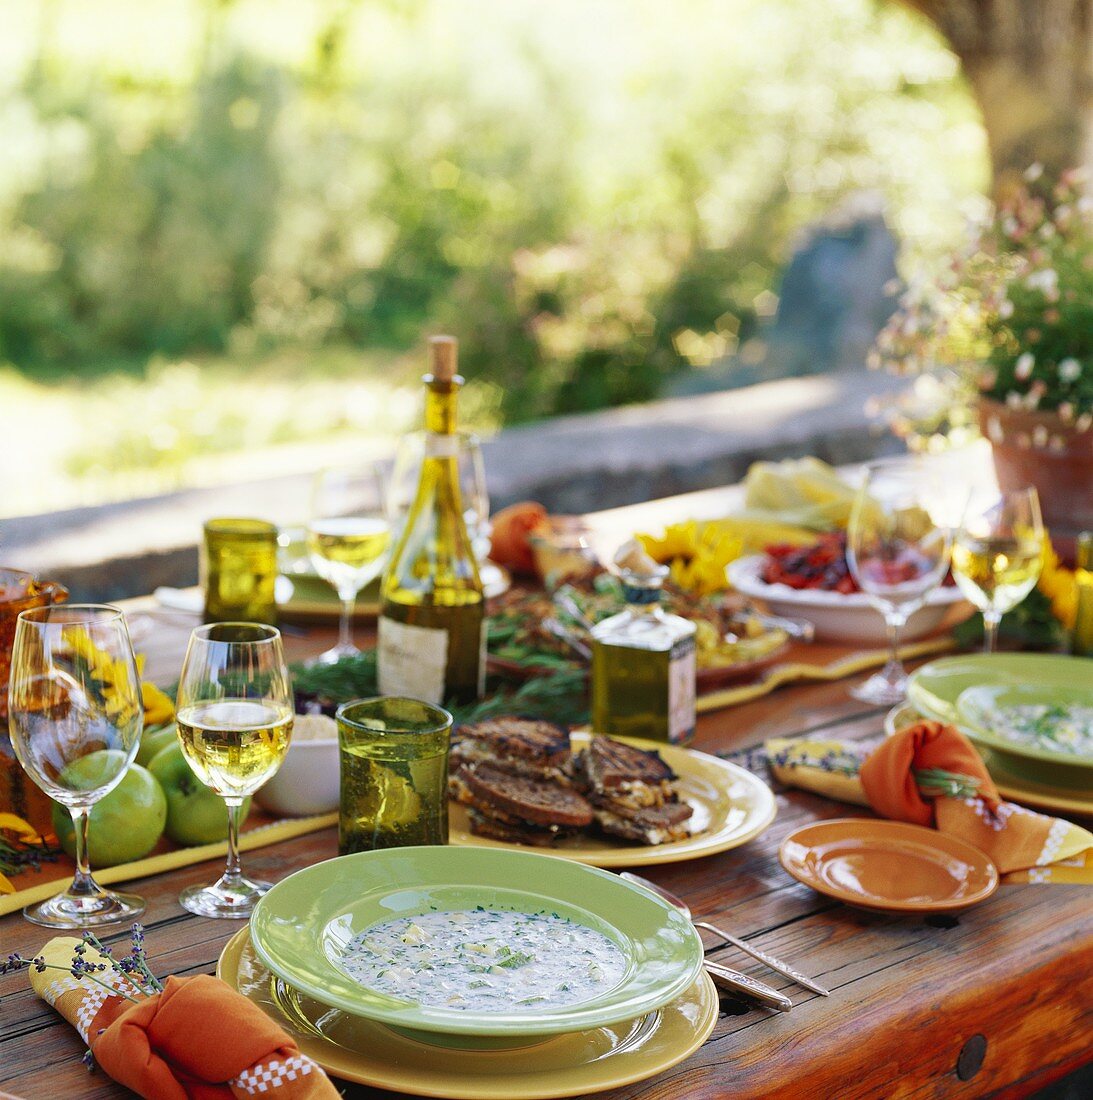 Outdoor Table setting with a Vegetarian Meal